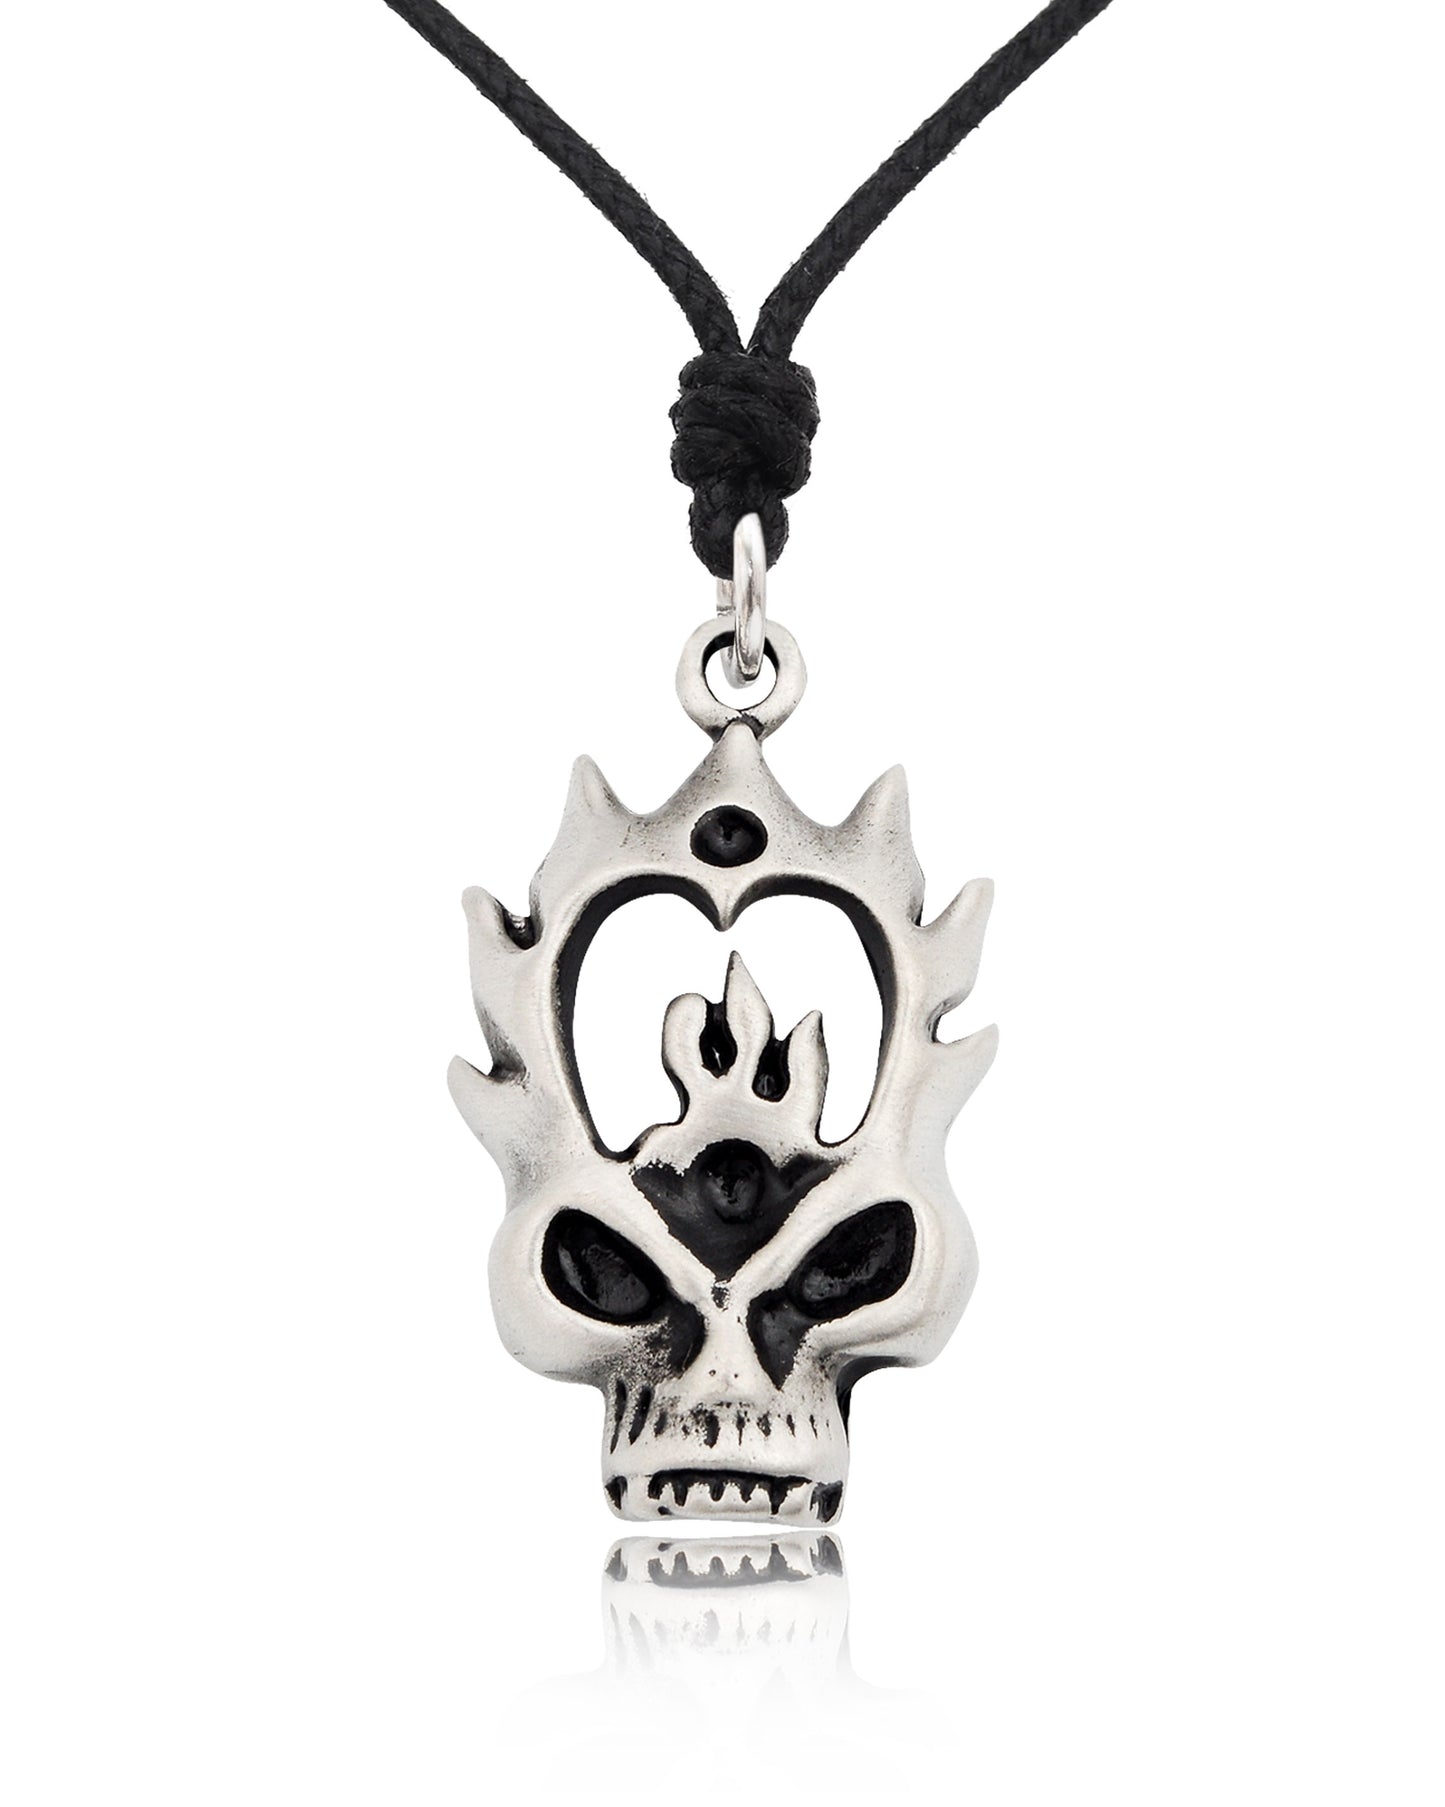 Durable Skull Silver Pewter Charm Necklace Pendant Jewelry